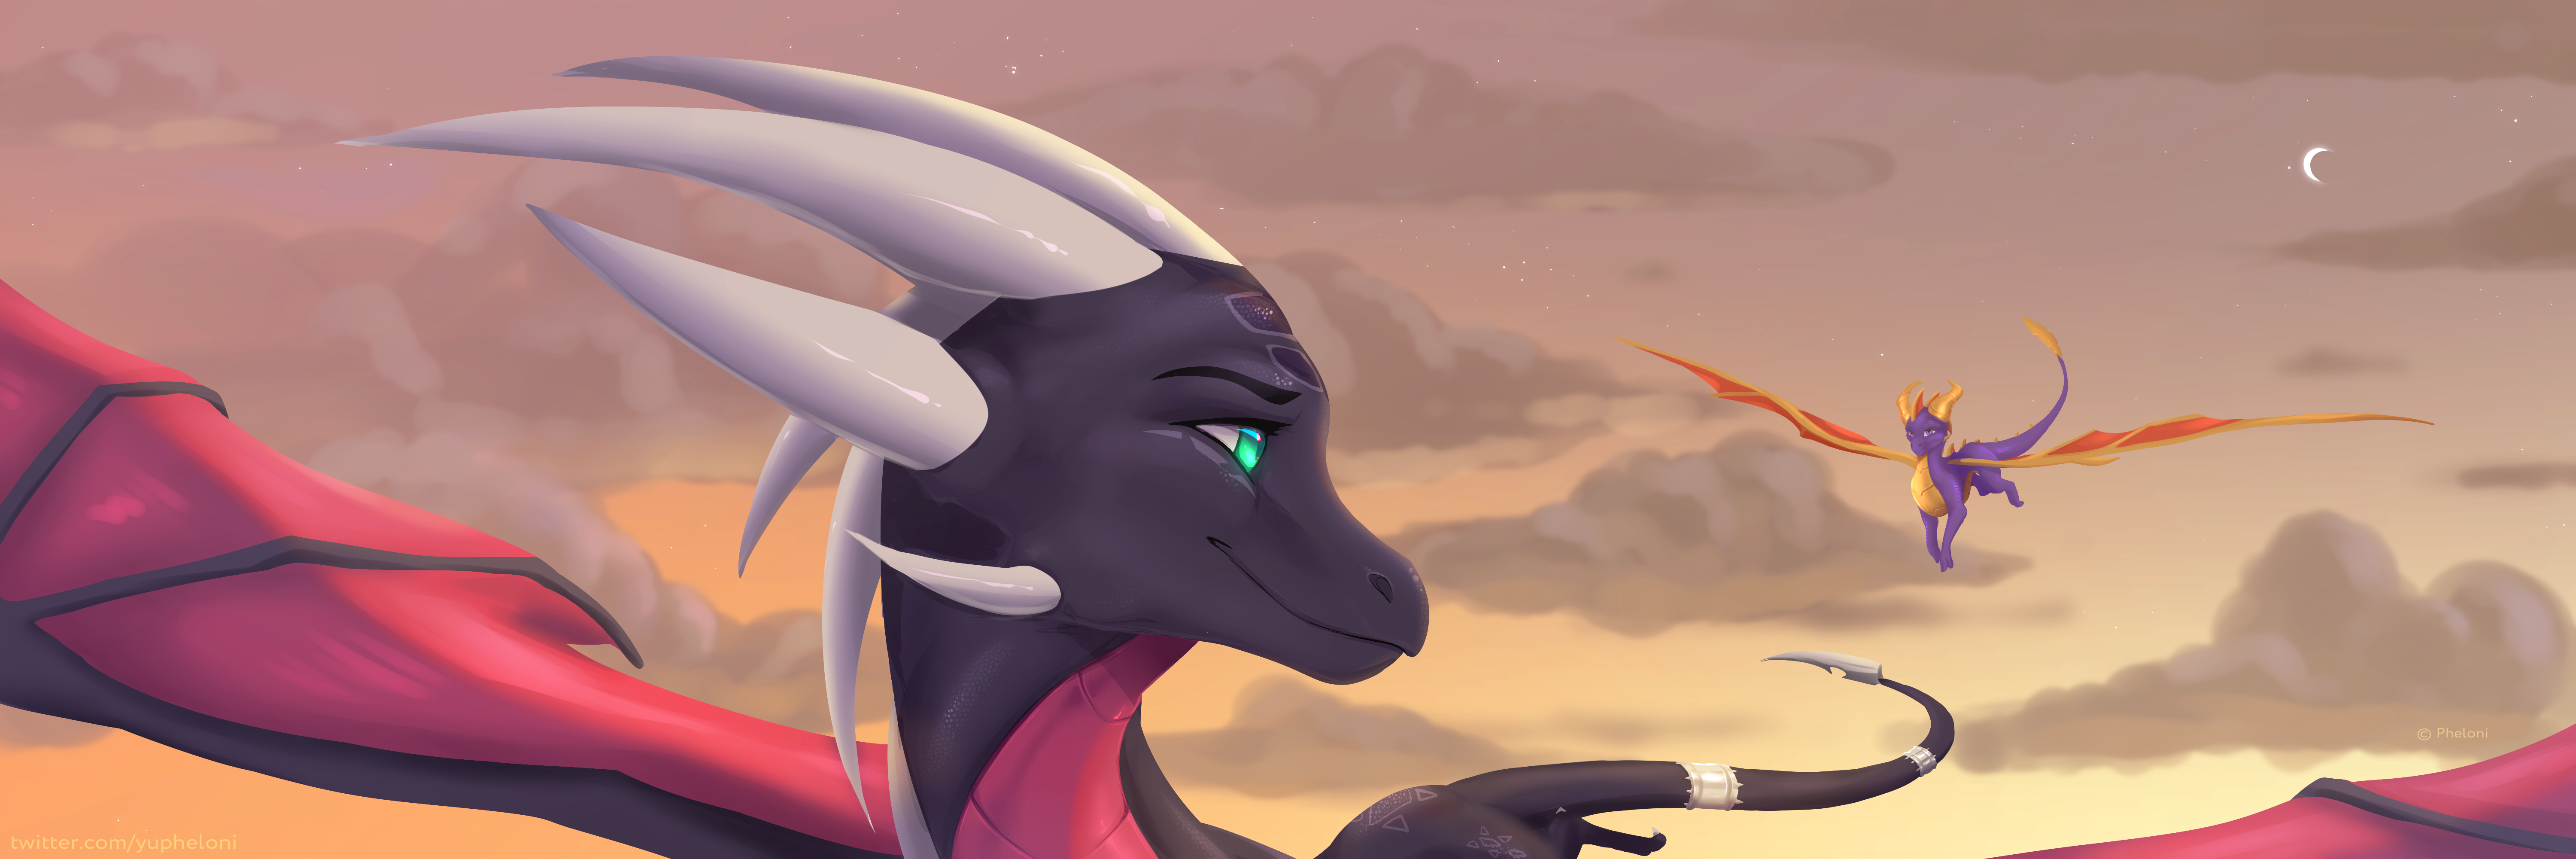 Dragon Video Game Characters Spyro The Legend Of Spyro Dawn Of The Dragon Cynder 6000x2000